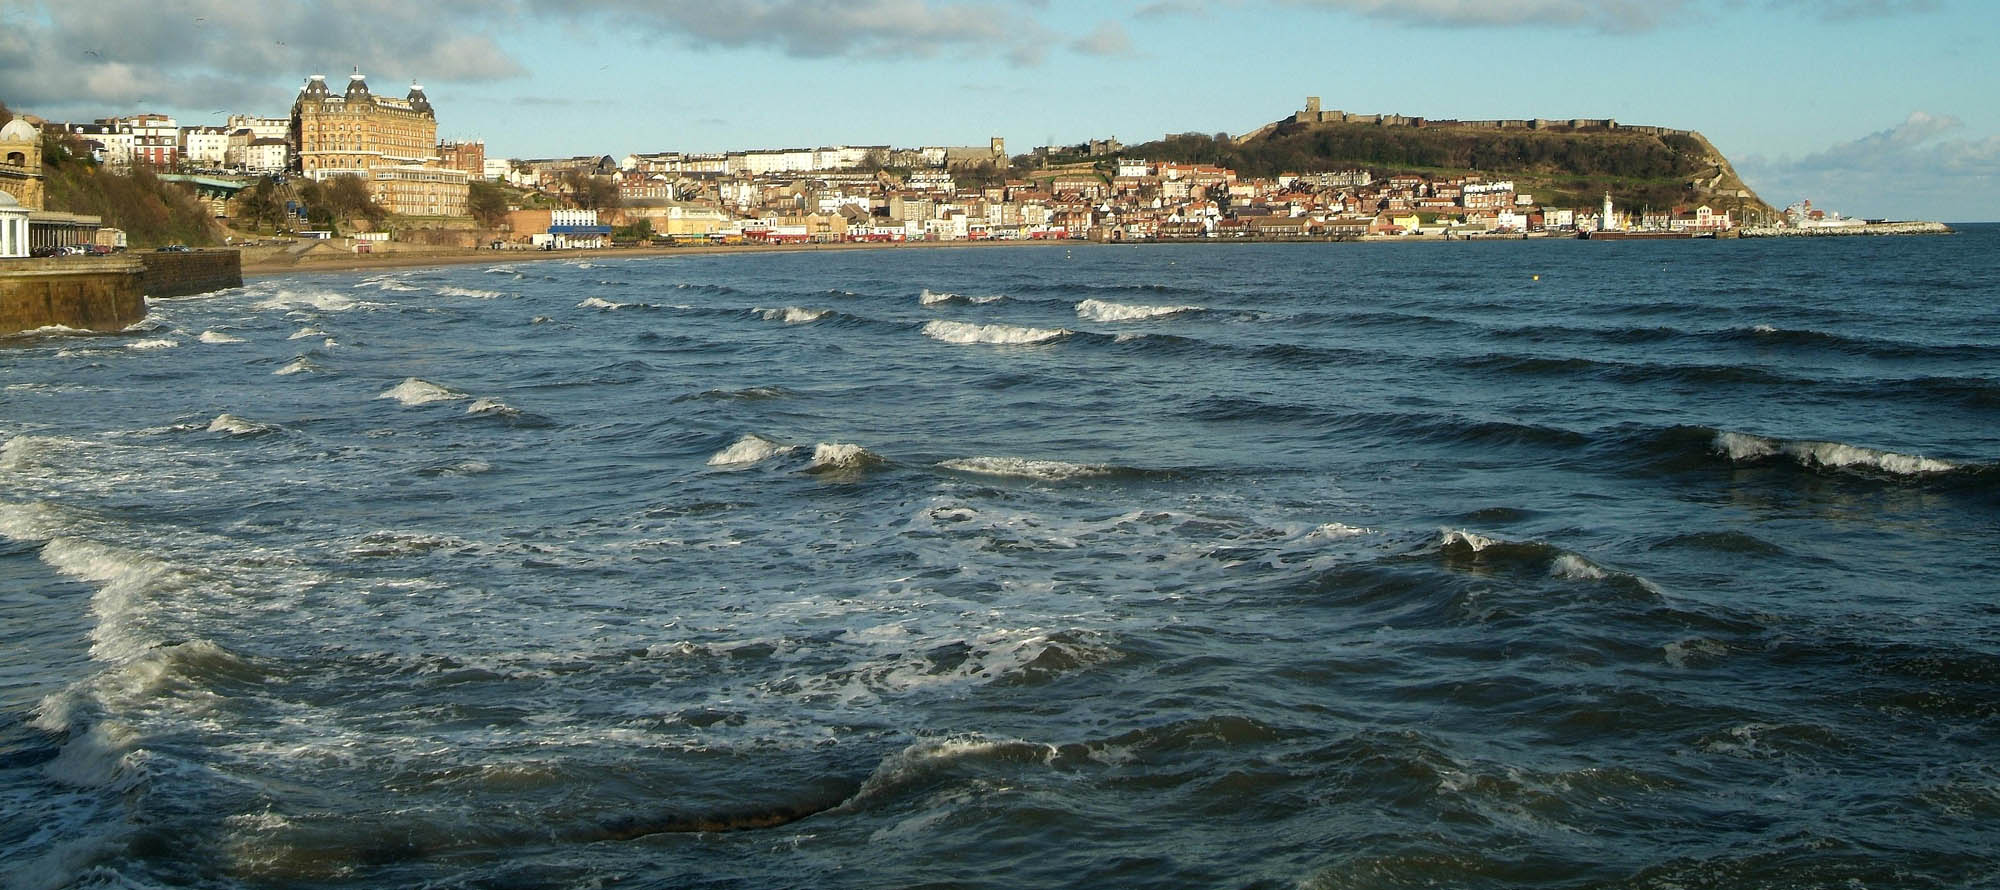 View across the water to the beach and the Grand Hotel, Scarborough, North Yorkshire